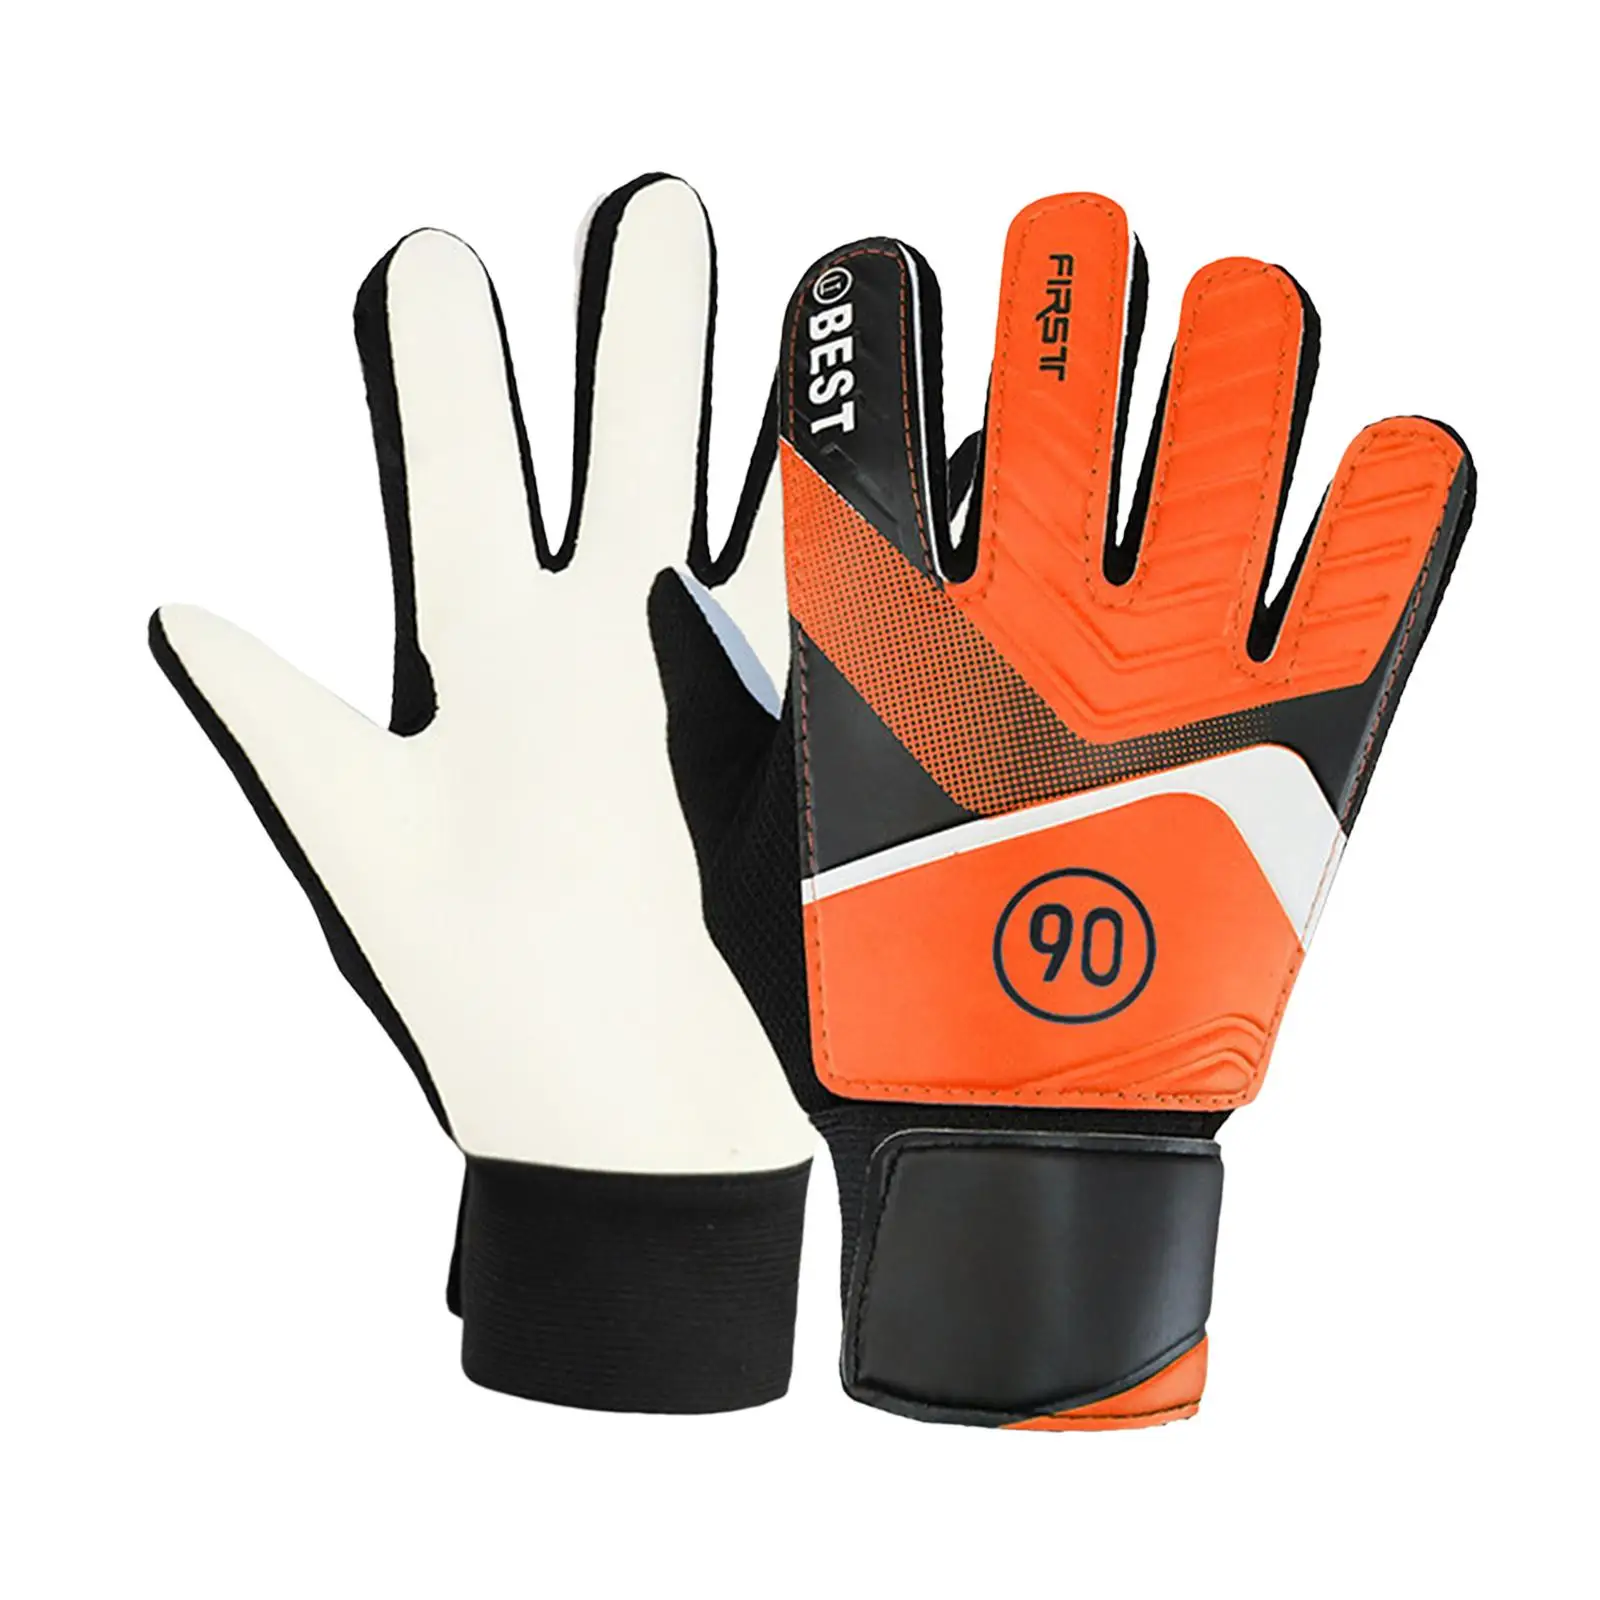 Goalkeeper Gloves Strong Grip Professional Finger Protection Comfortable